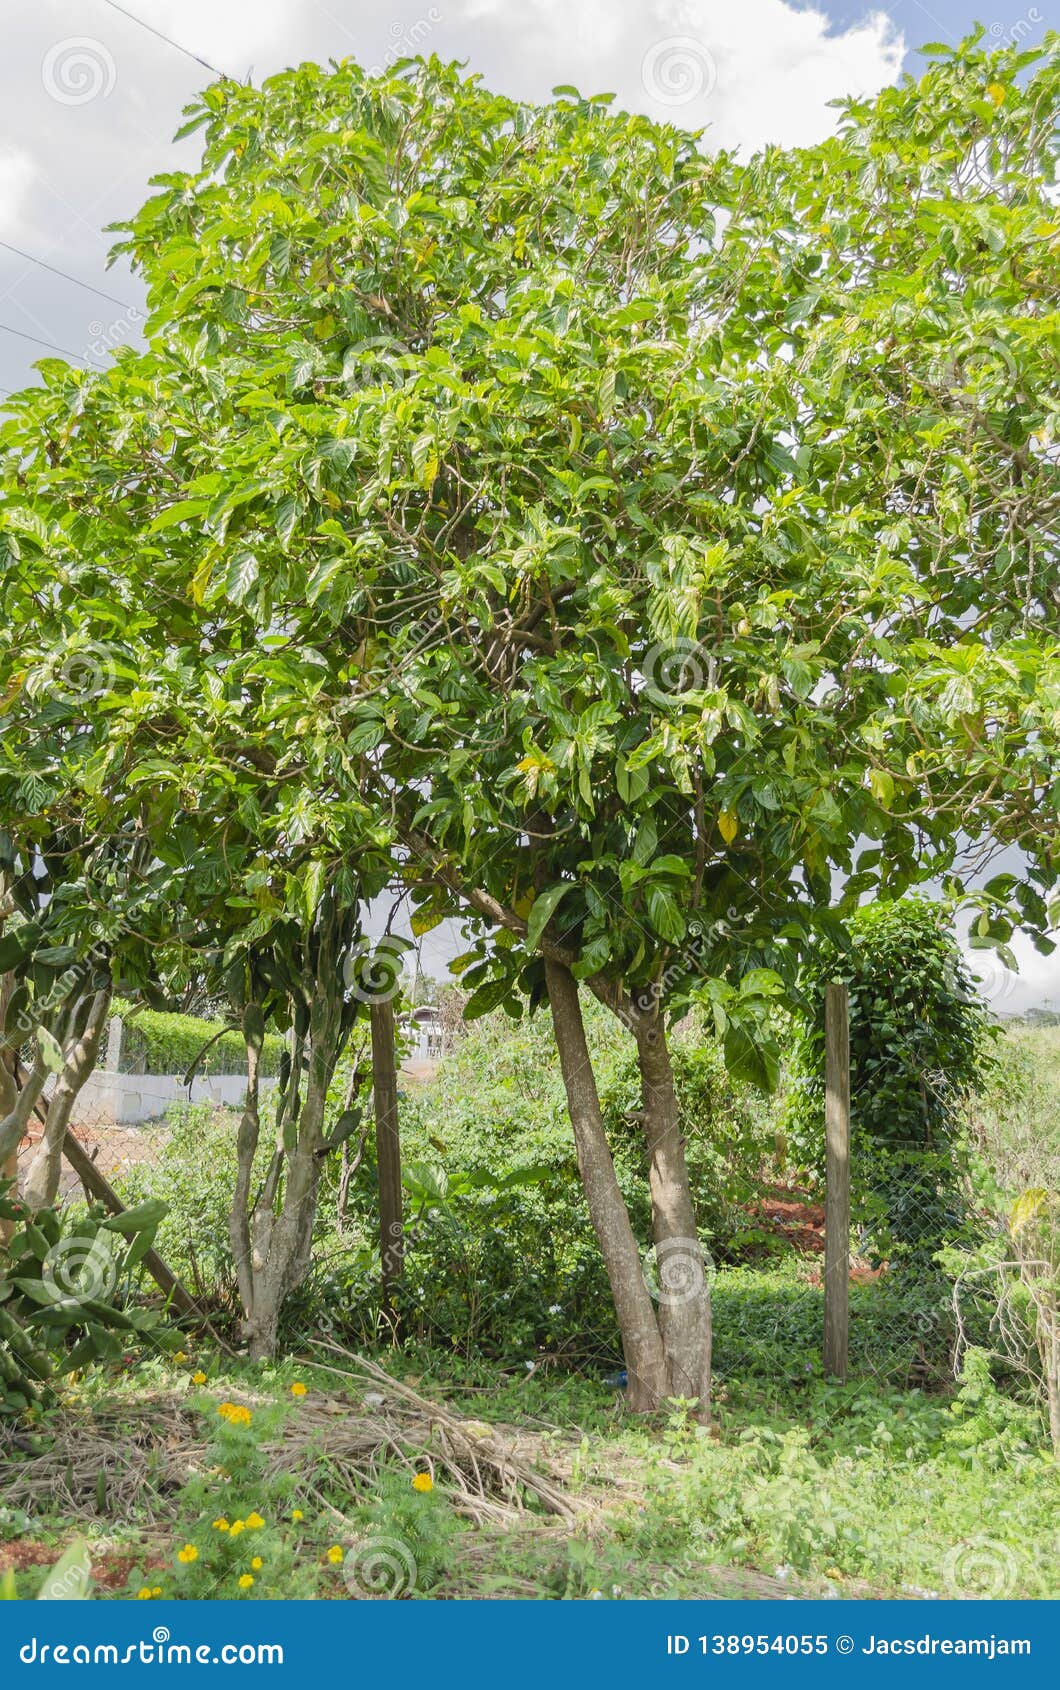 portait of a noni trees stock image. image of blossom - 138954055